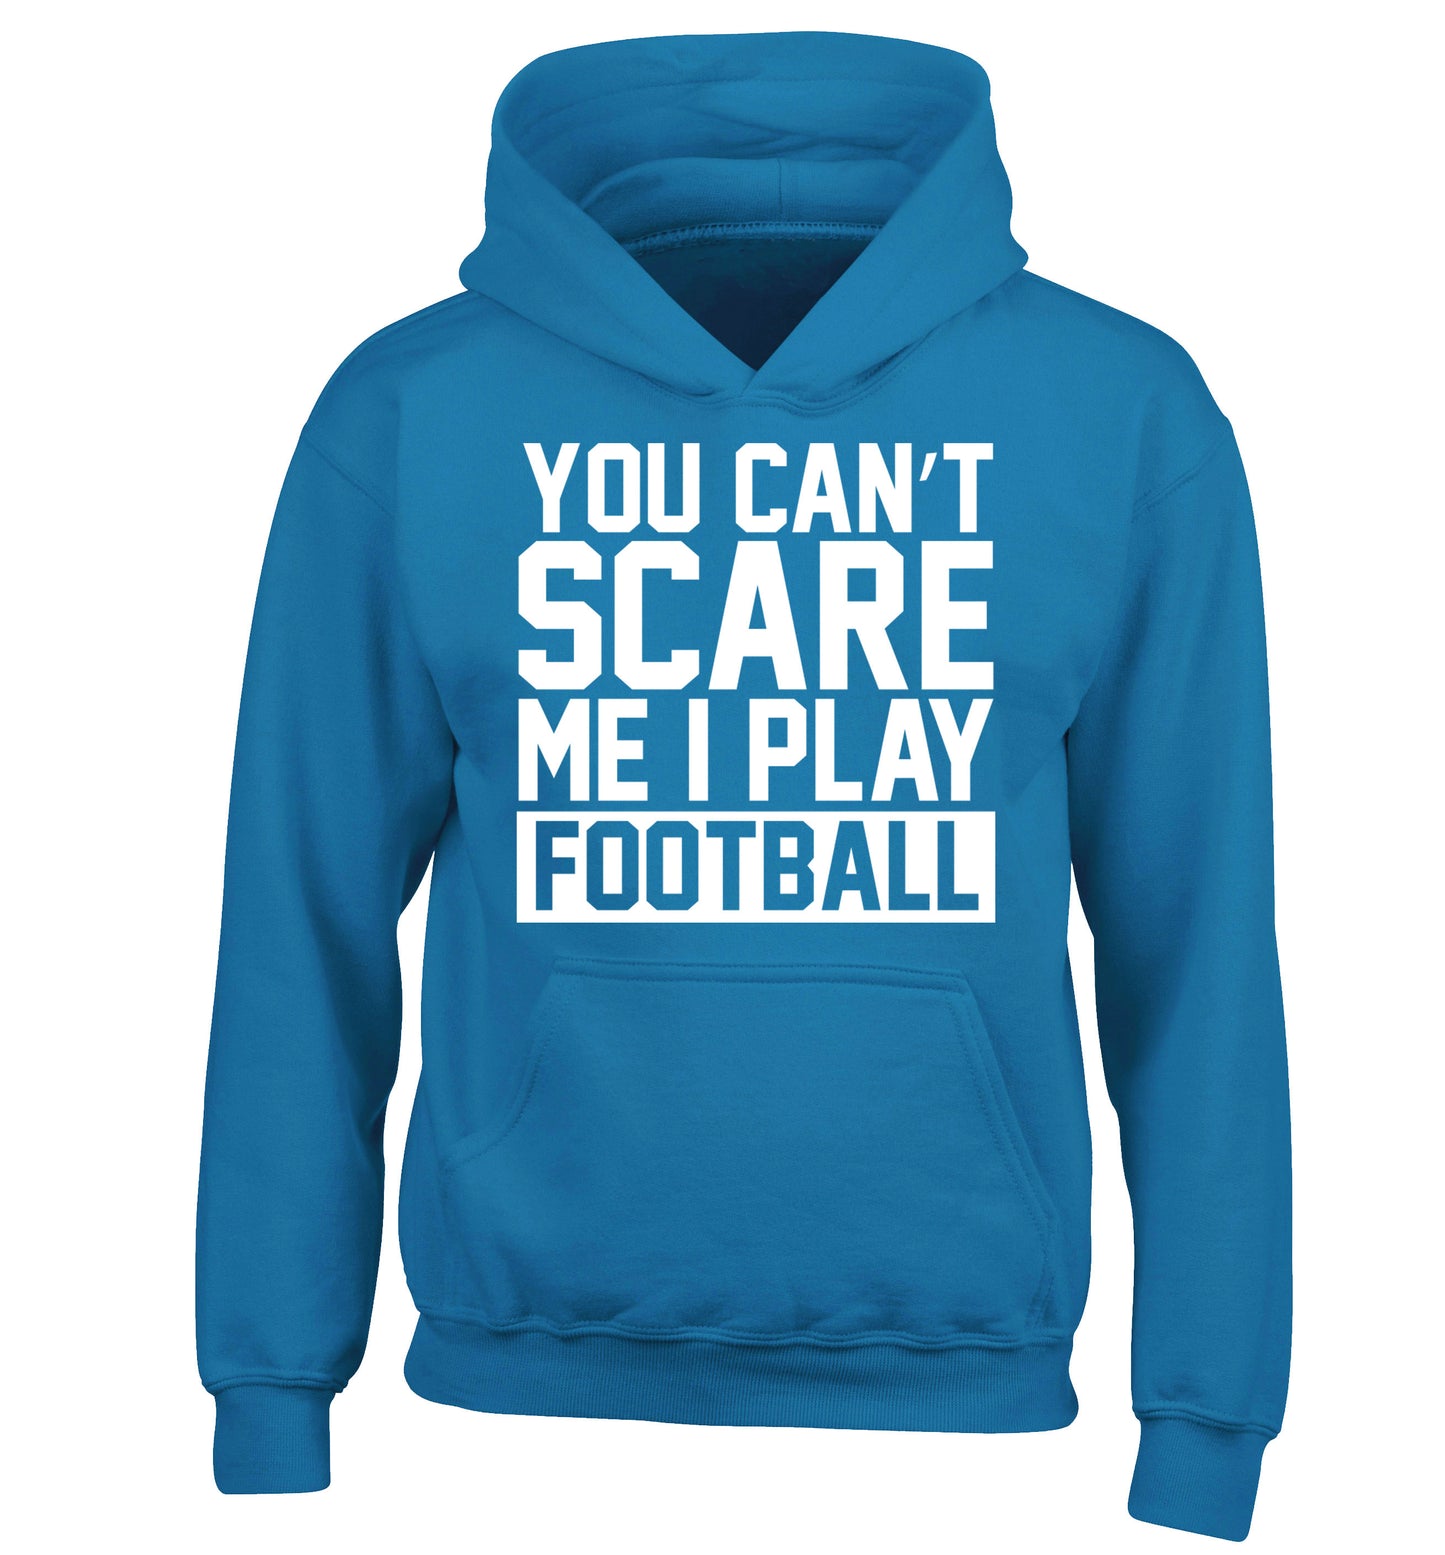 You can't scare me I play football children's blue hoodie 12-14 Years